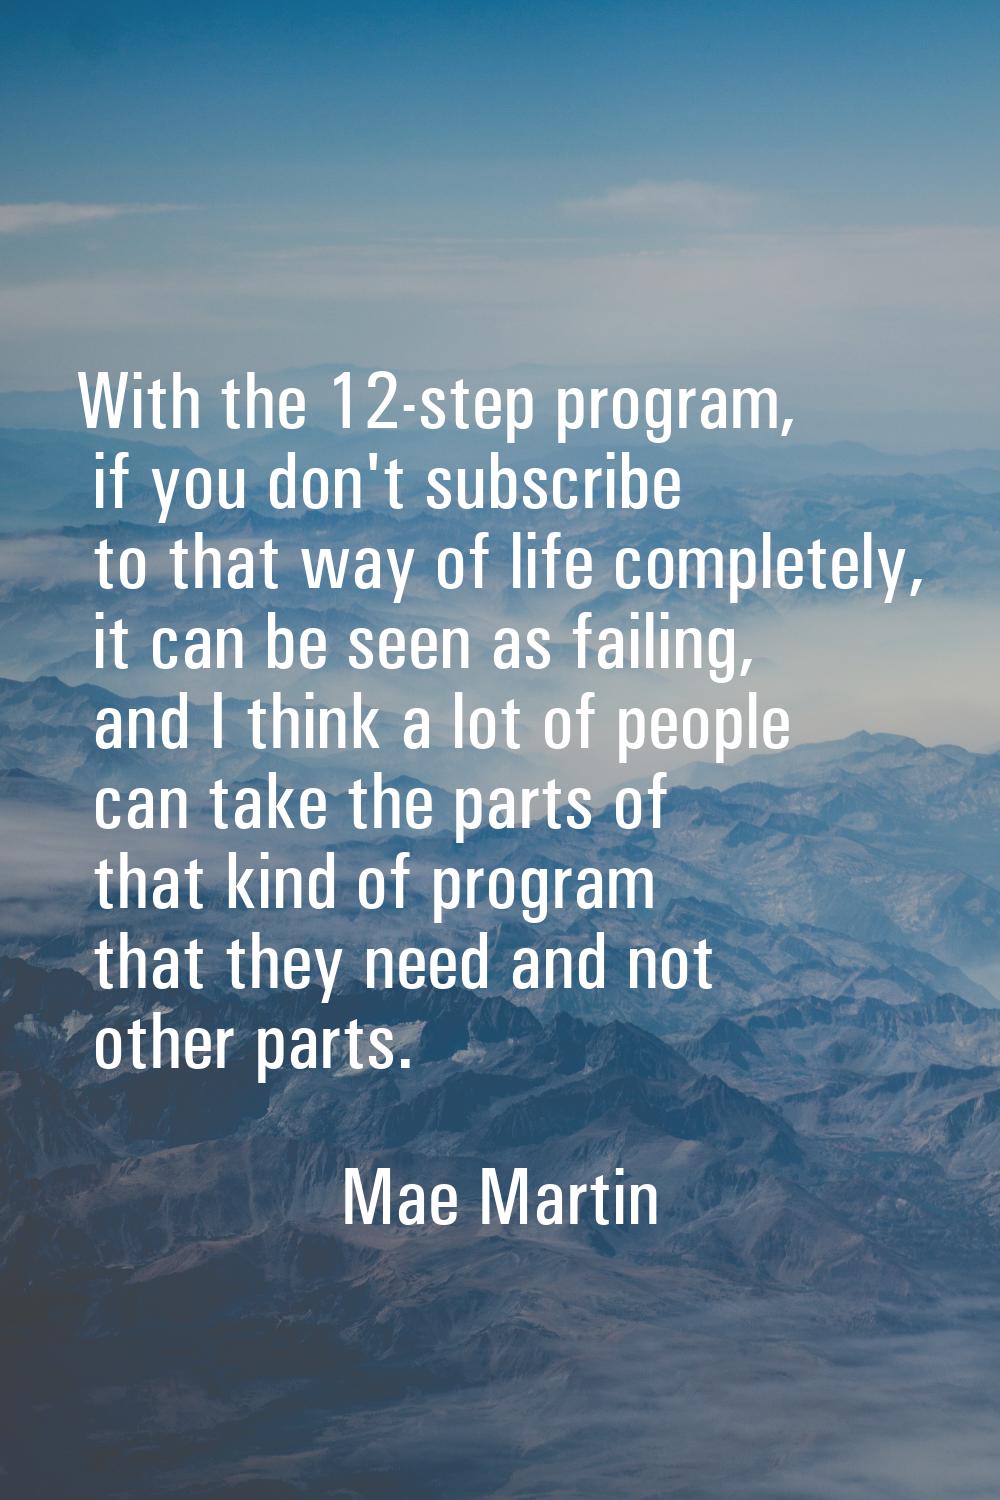 With the 12-step program, if you don't subscribe to that way of life completely, it can be seen as 